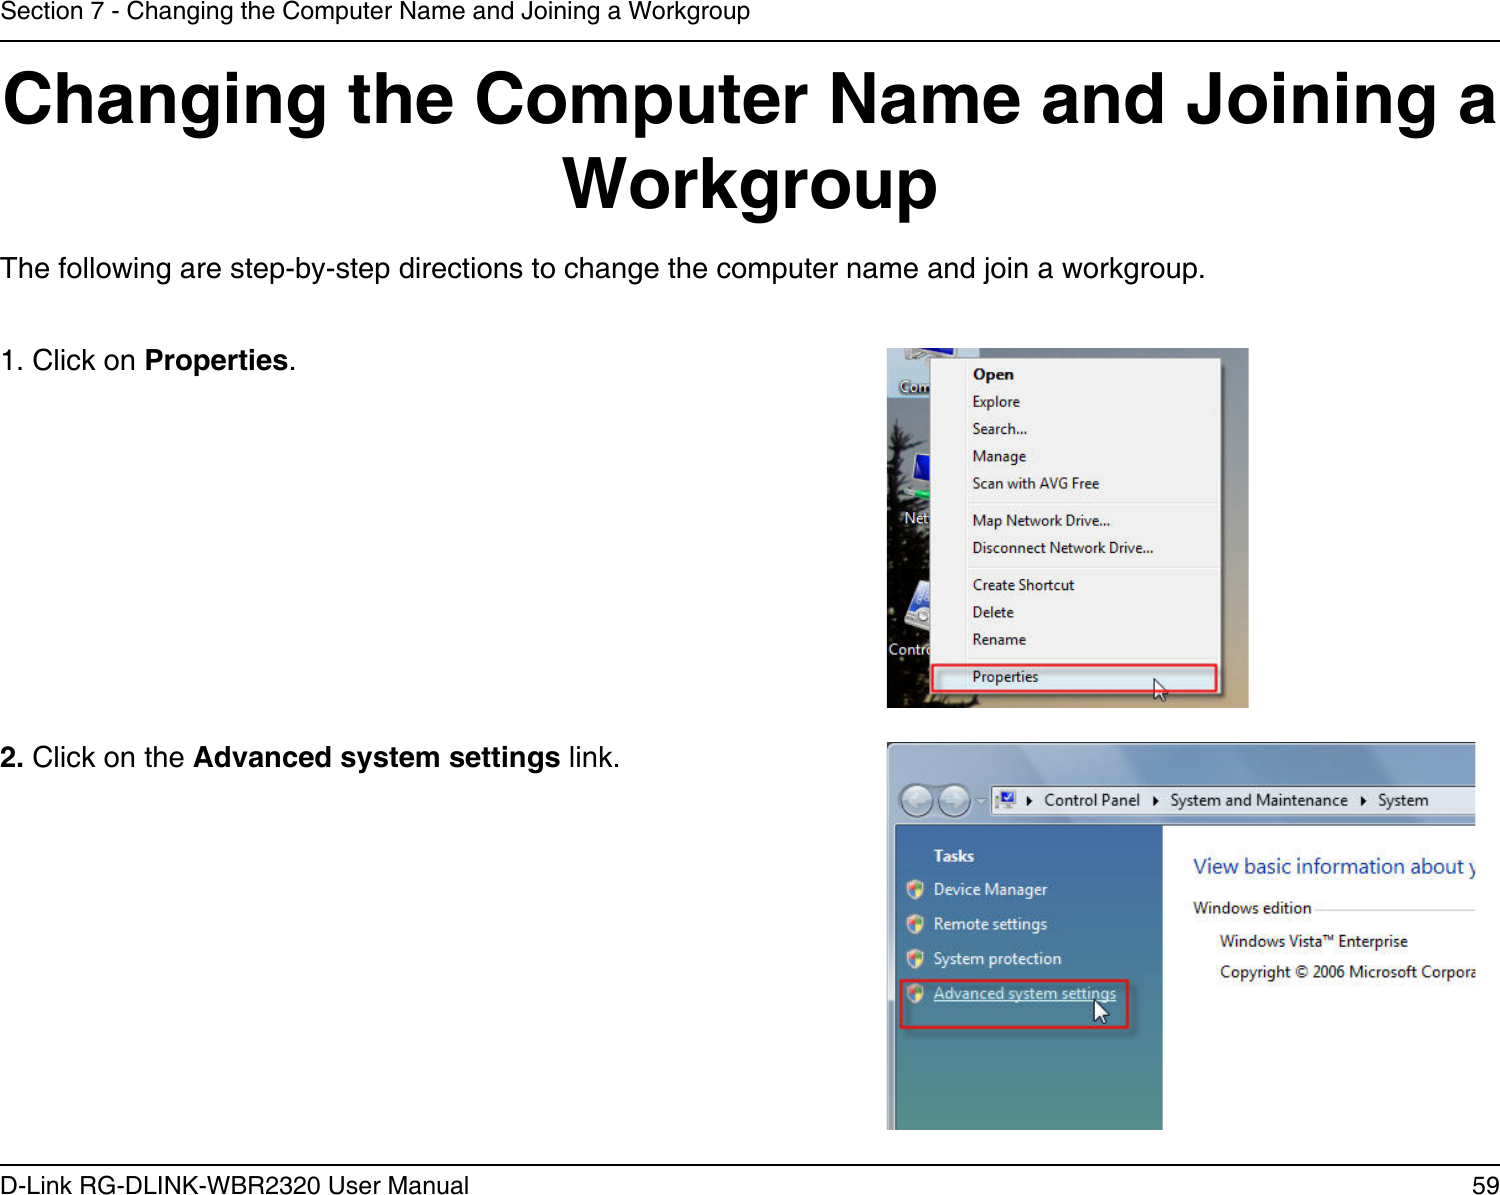 59D-Link RG-DLINK-WBR2320 User ManualSection 7 - Changing the Computer Name and Joining a WorkgroupChanging the Computer Name and Joining a WorkgroupThe following are step-by-step directions to change the computer name and join a workgroup.      2. Click on the Advanced system settings link. 1. Click on Properties.     